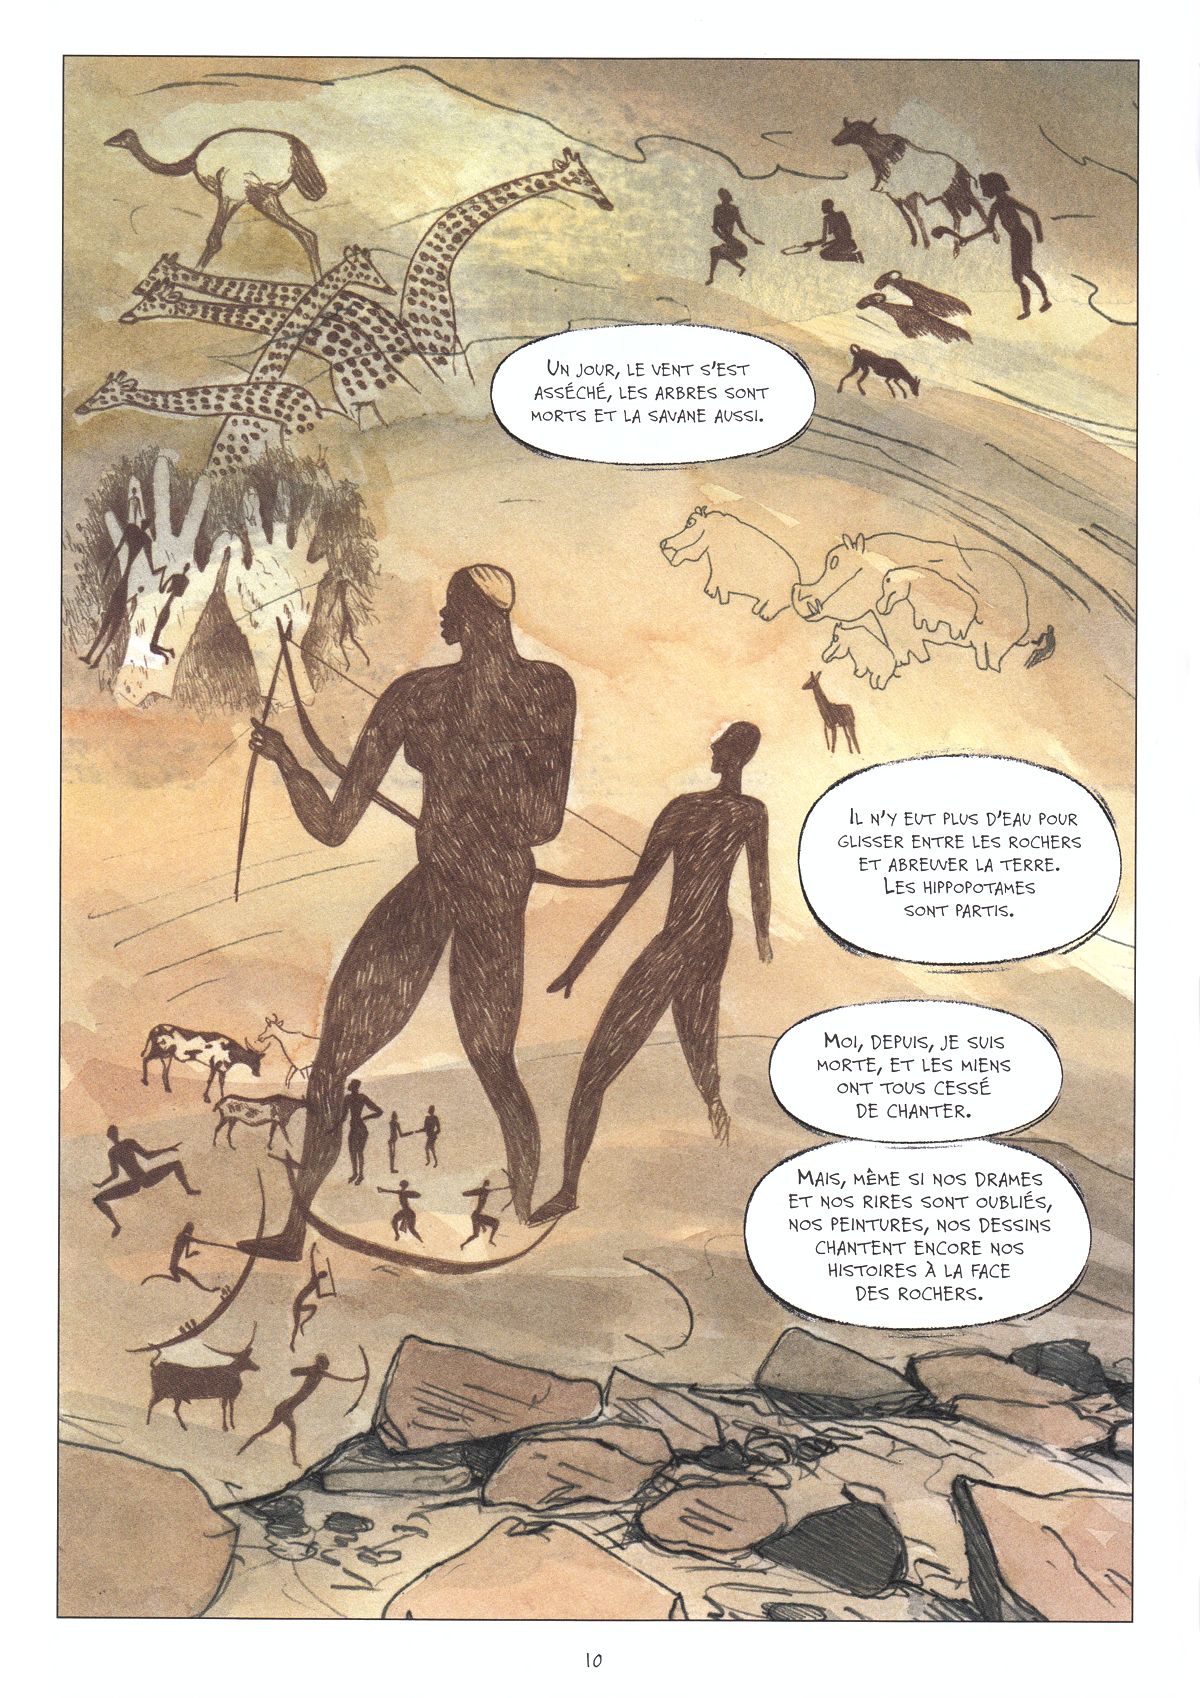 Page from the comic book « Tassili, une femme libre au Néolithique » by Maadiar and Fréwé evoking the archival value of the cave paintings and engravings left on the walls by the first farmers in the central Sahara. “Even if our tragedies and our laughter have been forgotten, our paintings, our drawings still sing our stories on the rock faces.”